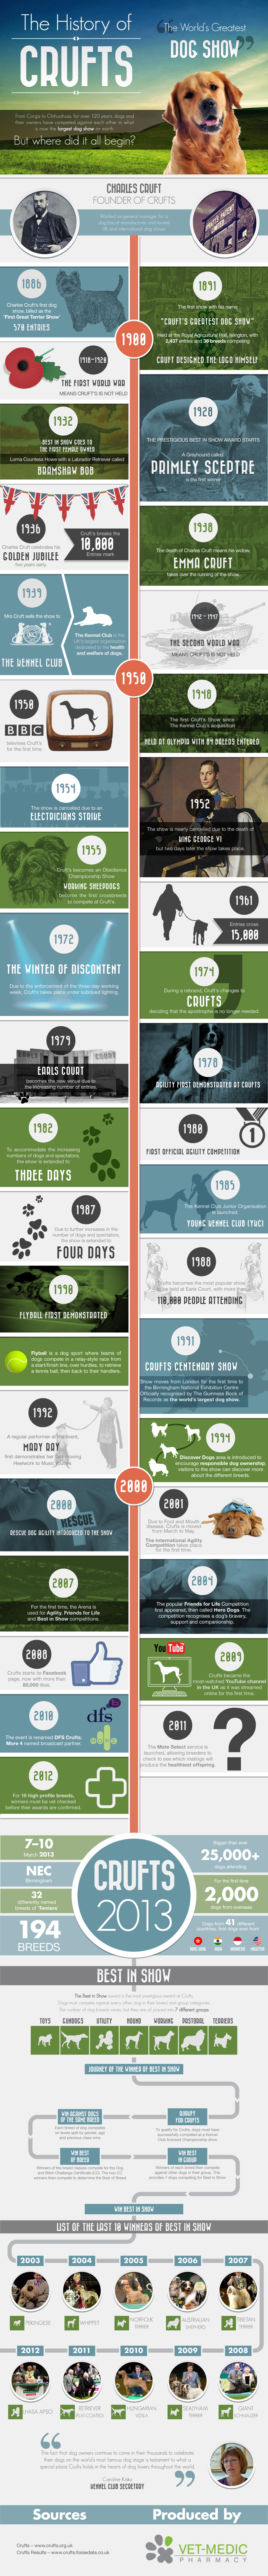 5.The history of Crufts